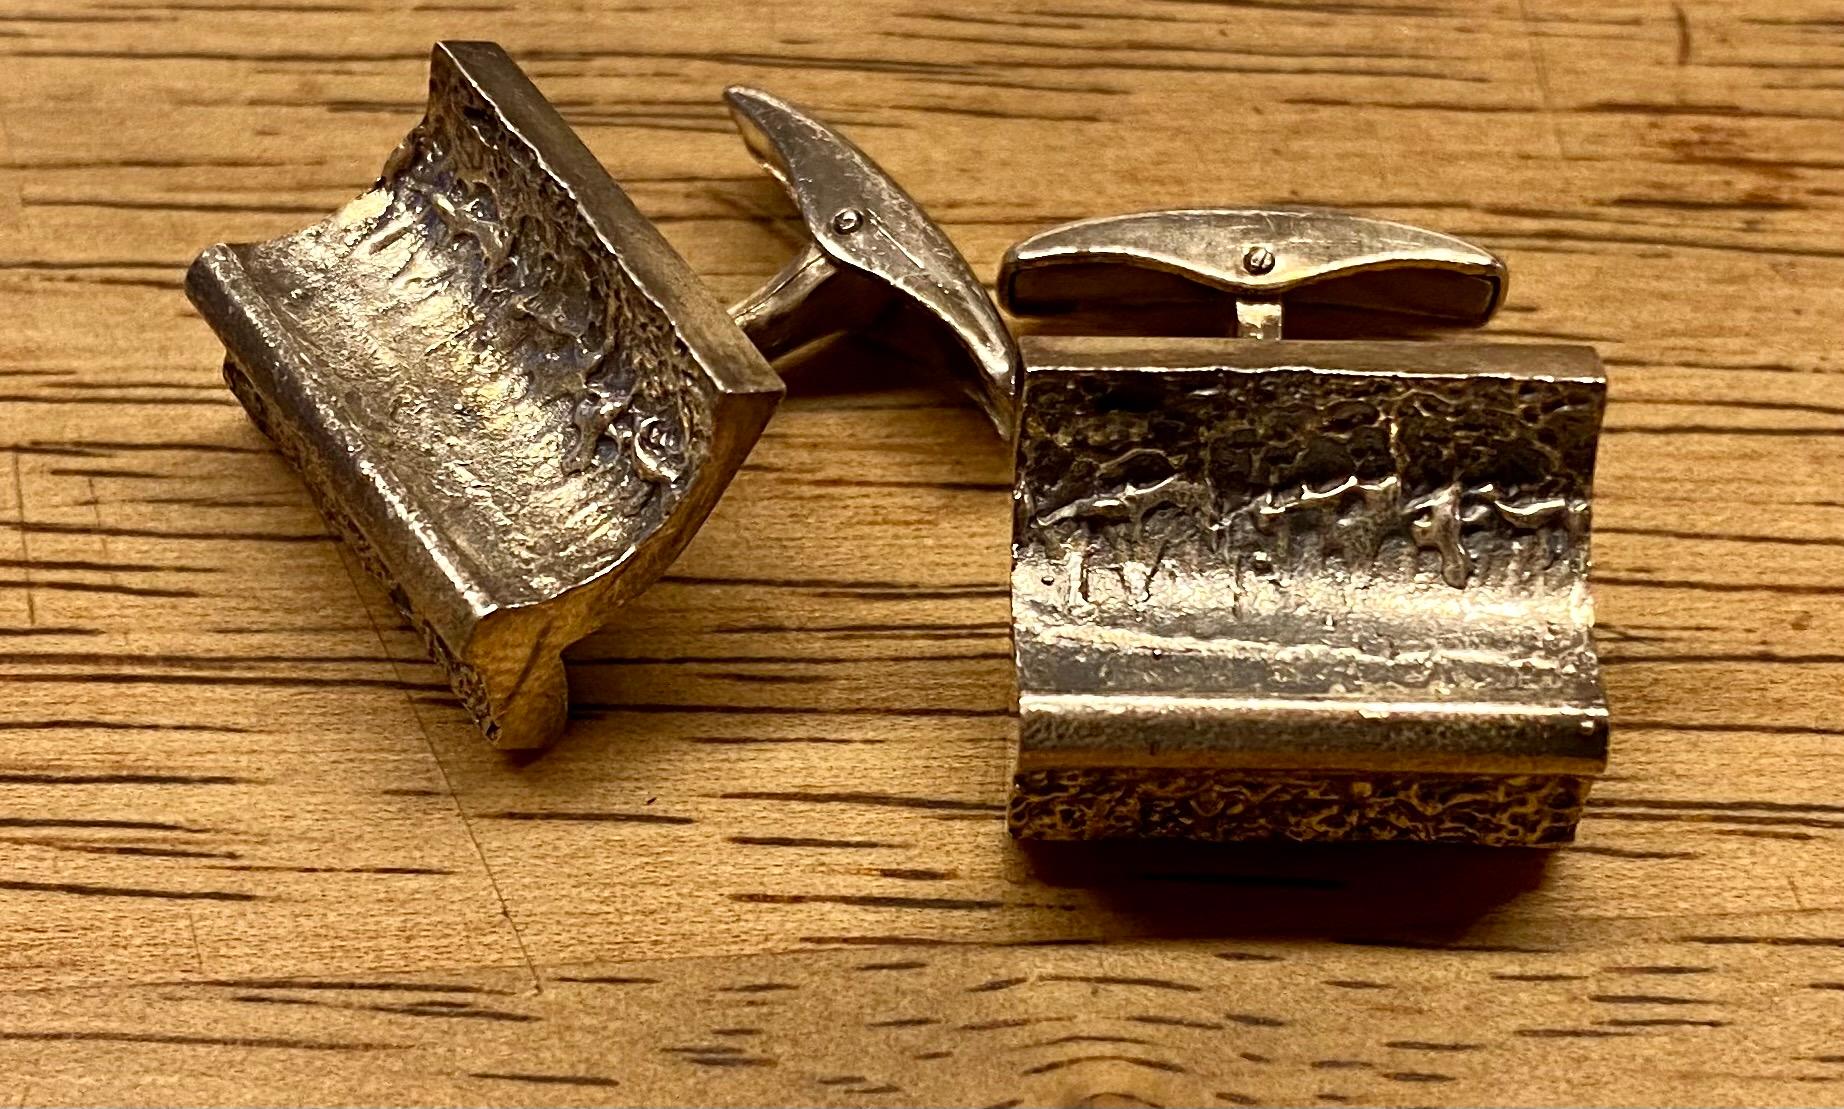 Brutal Silver Cufflinks Made in Finland.
Engraving on the body 7 / 12-74. Does not appear when in use.
and VL Back. See Foto
Made in 1971 Turku Finland Tammen Koru Oy